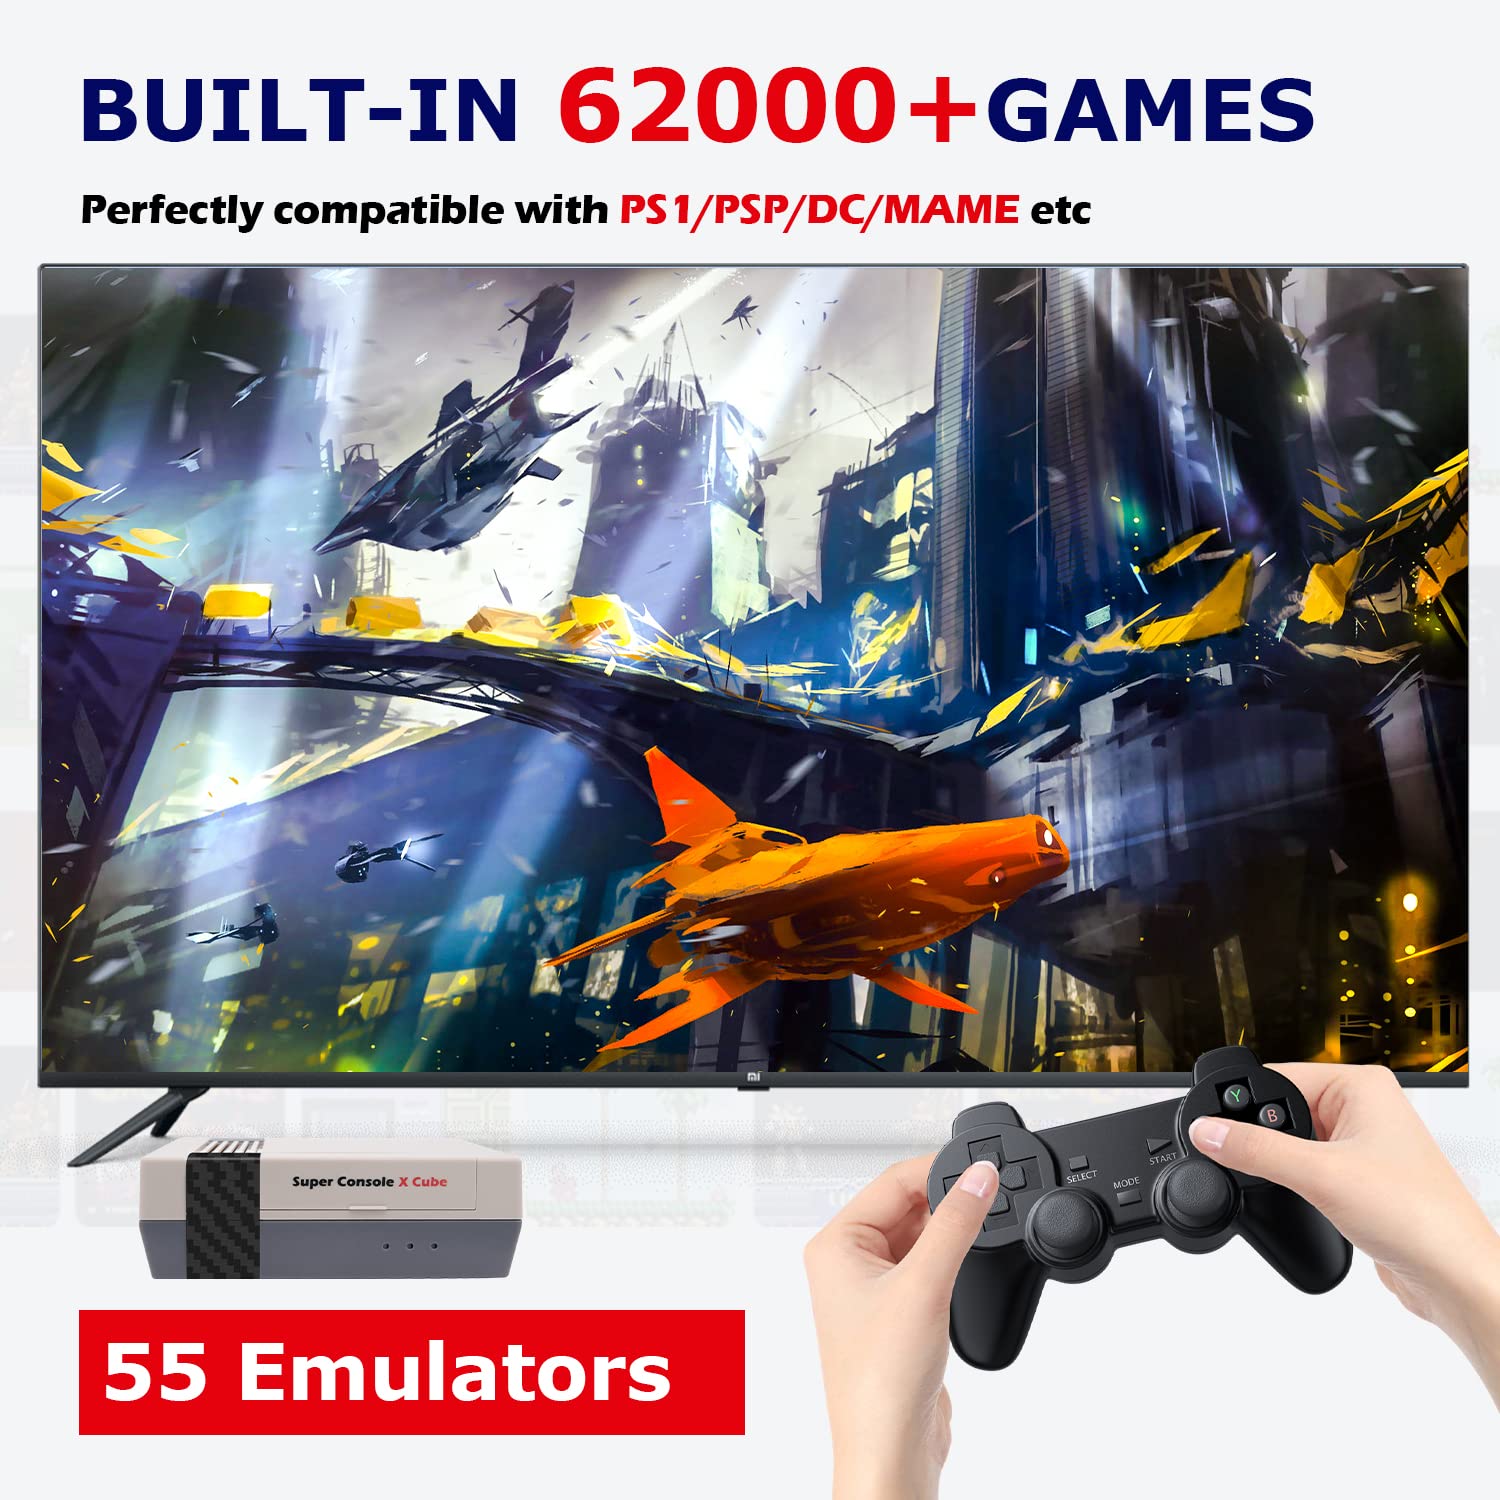 62,000+ Retro Games,Super Console X Cube Pro Gaming Console Mini Game Emulator Support 4K TV Output,Up to 4 Players,LAN/WiFi,Best Gifts for Men/Adult